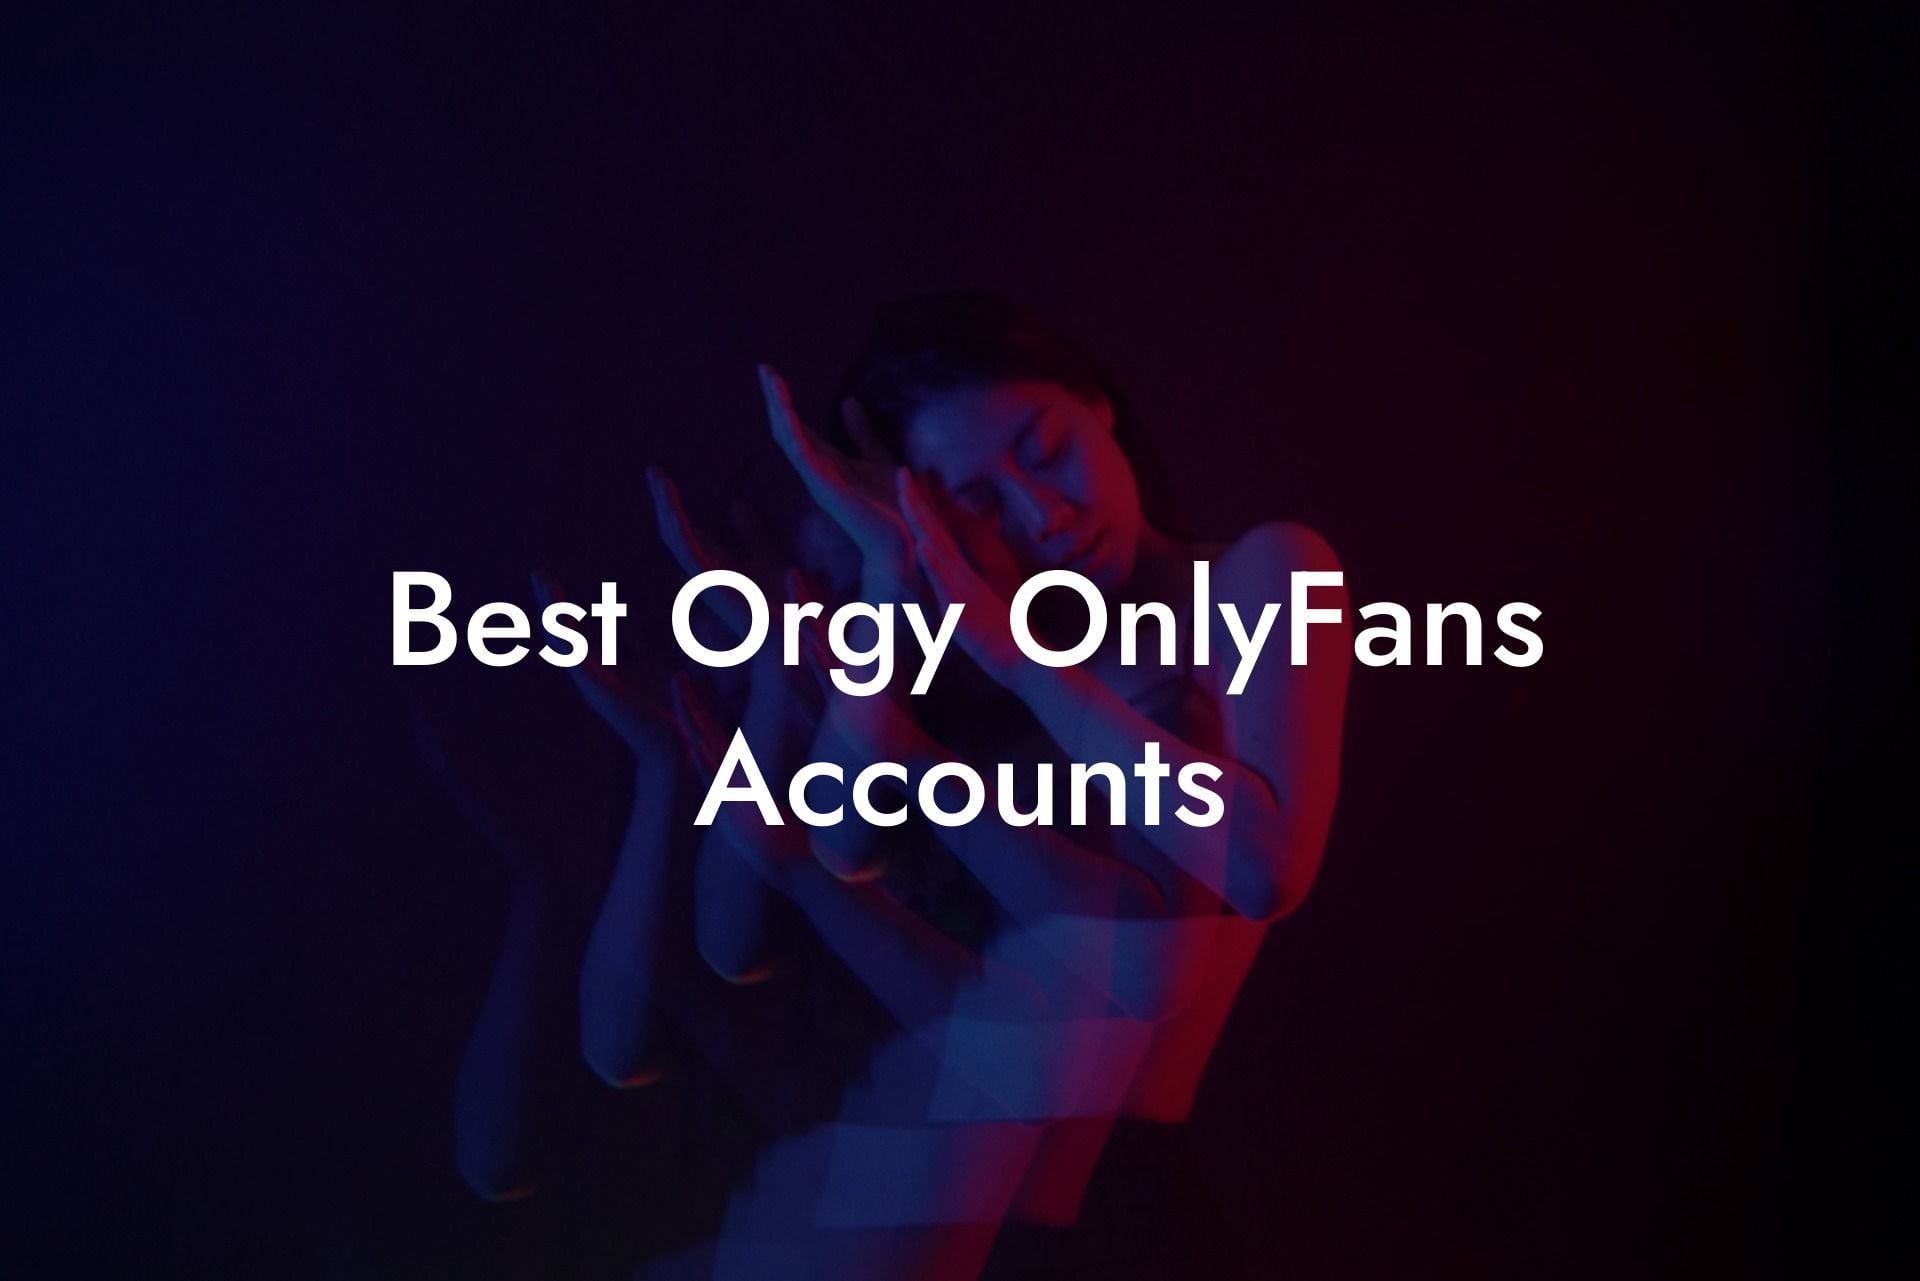 Best Orgy OnlyFans Accounts